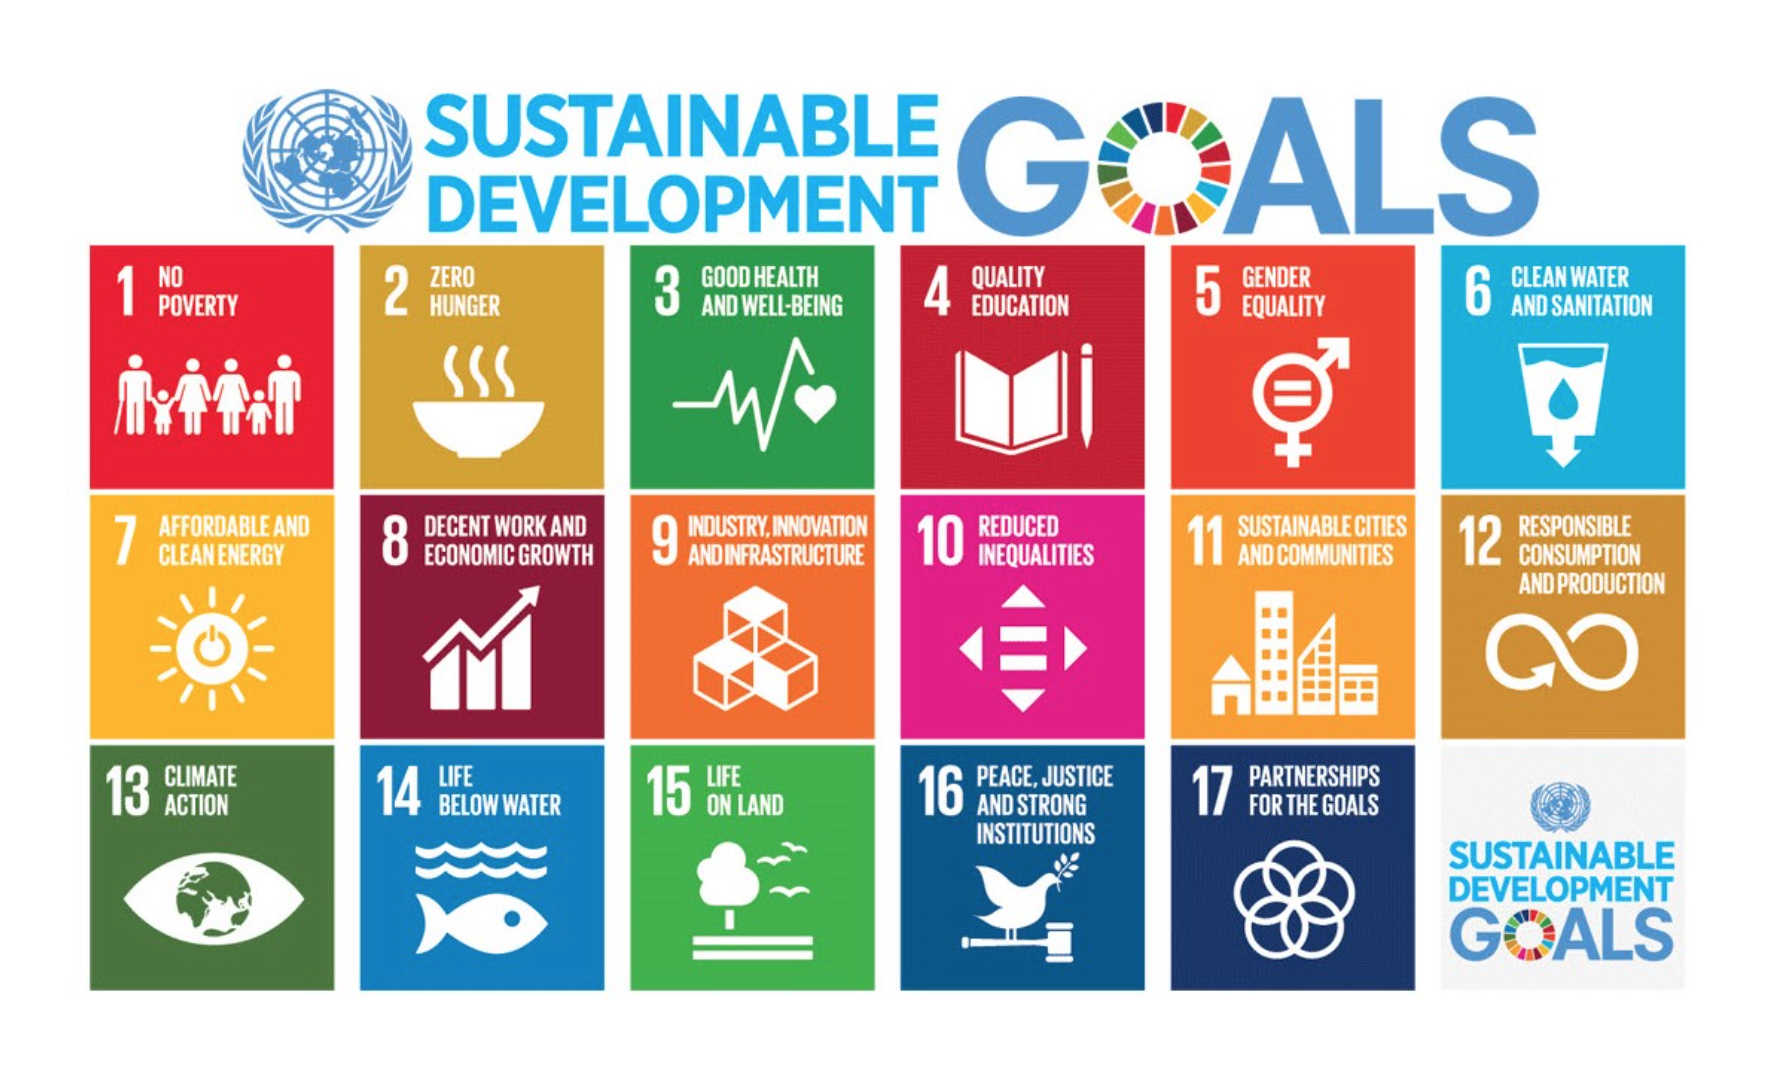 United Nations' sustainable development goals presented on a chart.